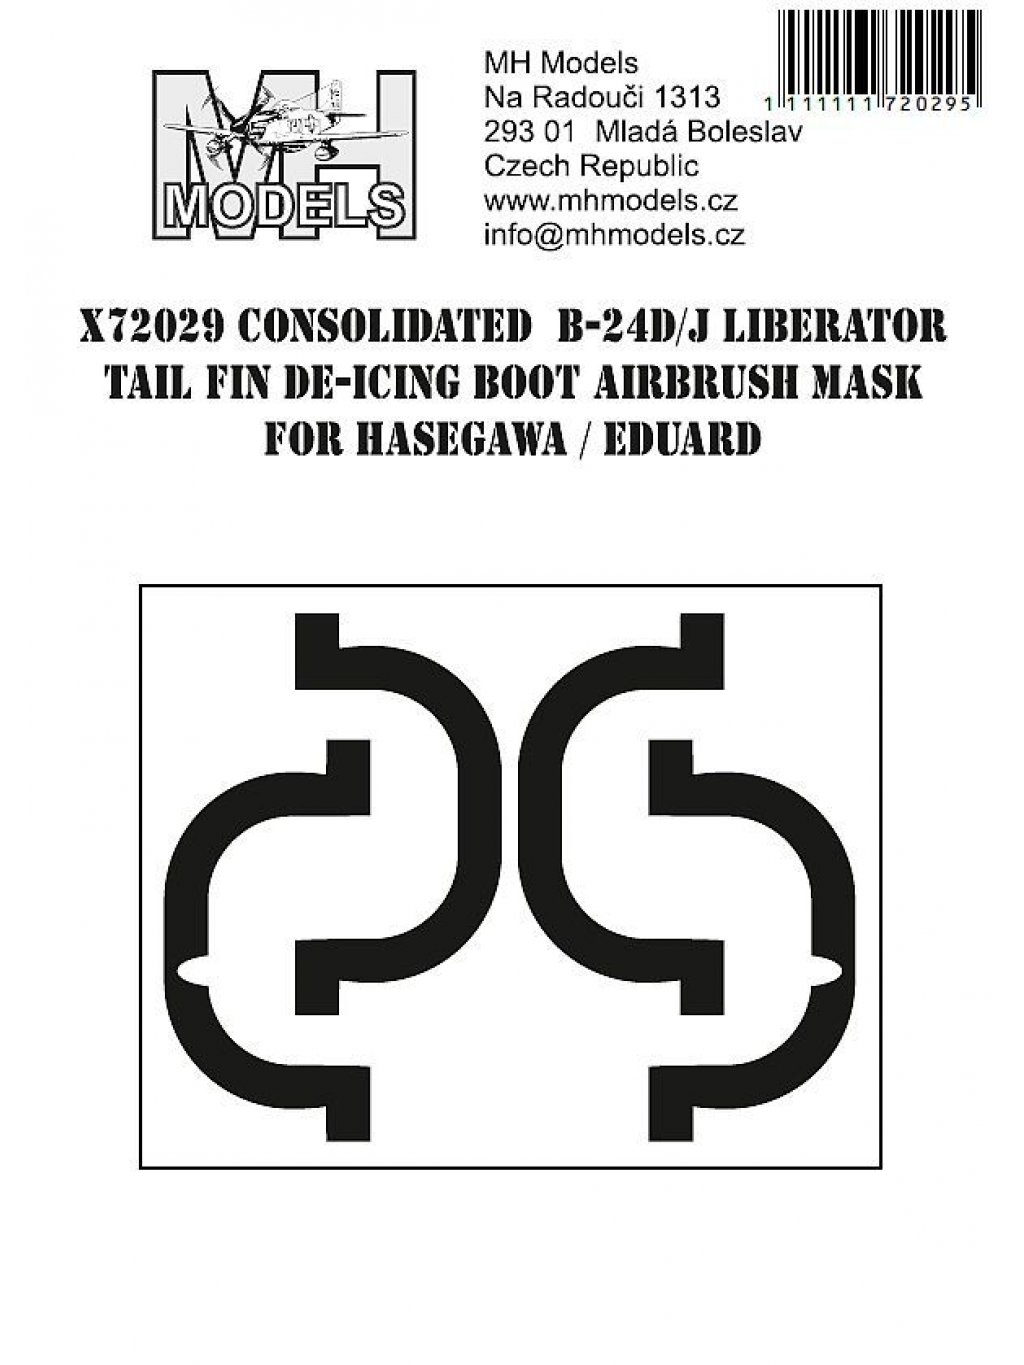 Consolidated B-24D/J Liberator Tail Fin De-icing Boot airbrush mask for Hasegawa/Eduard